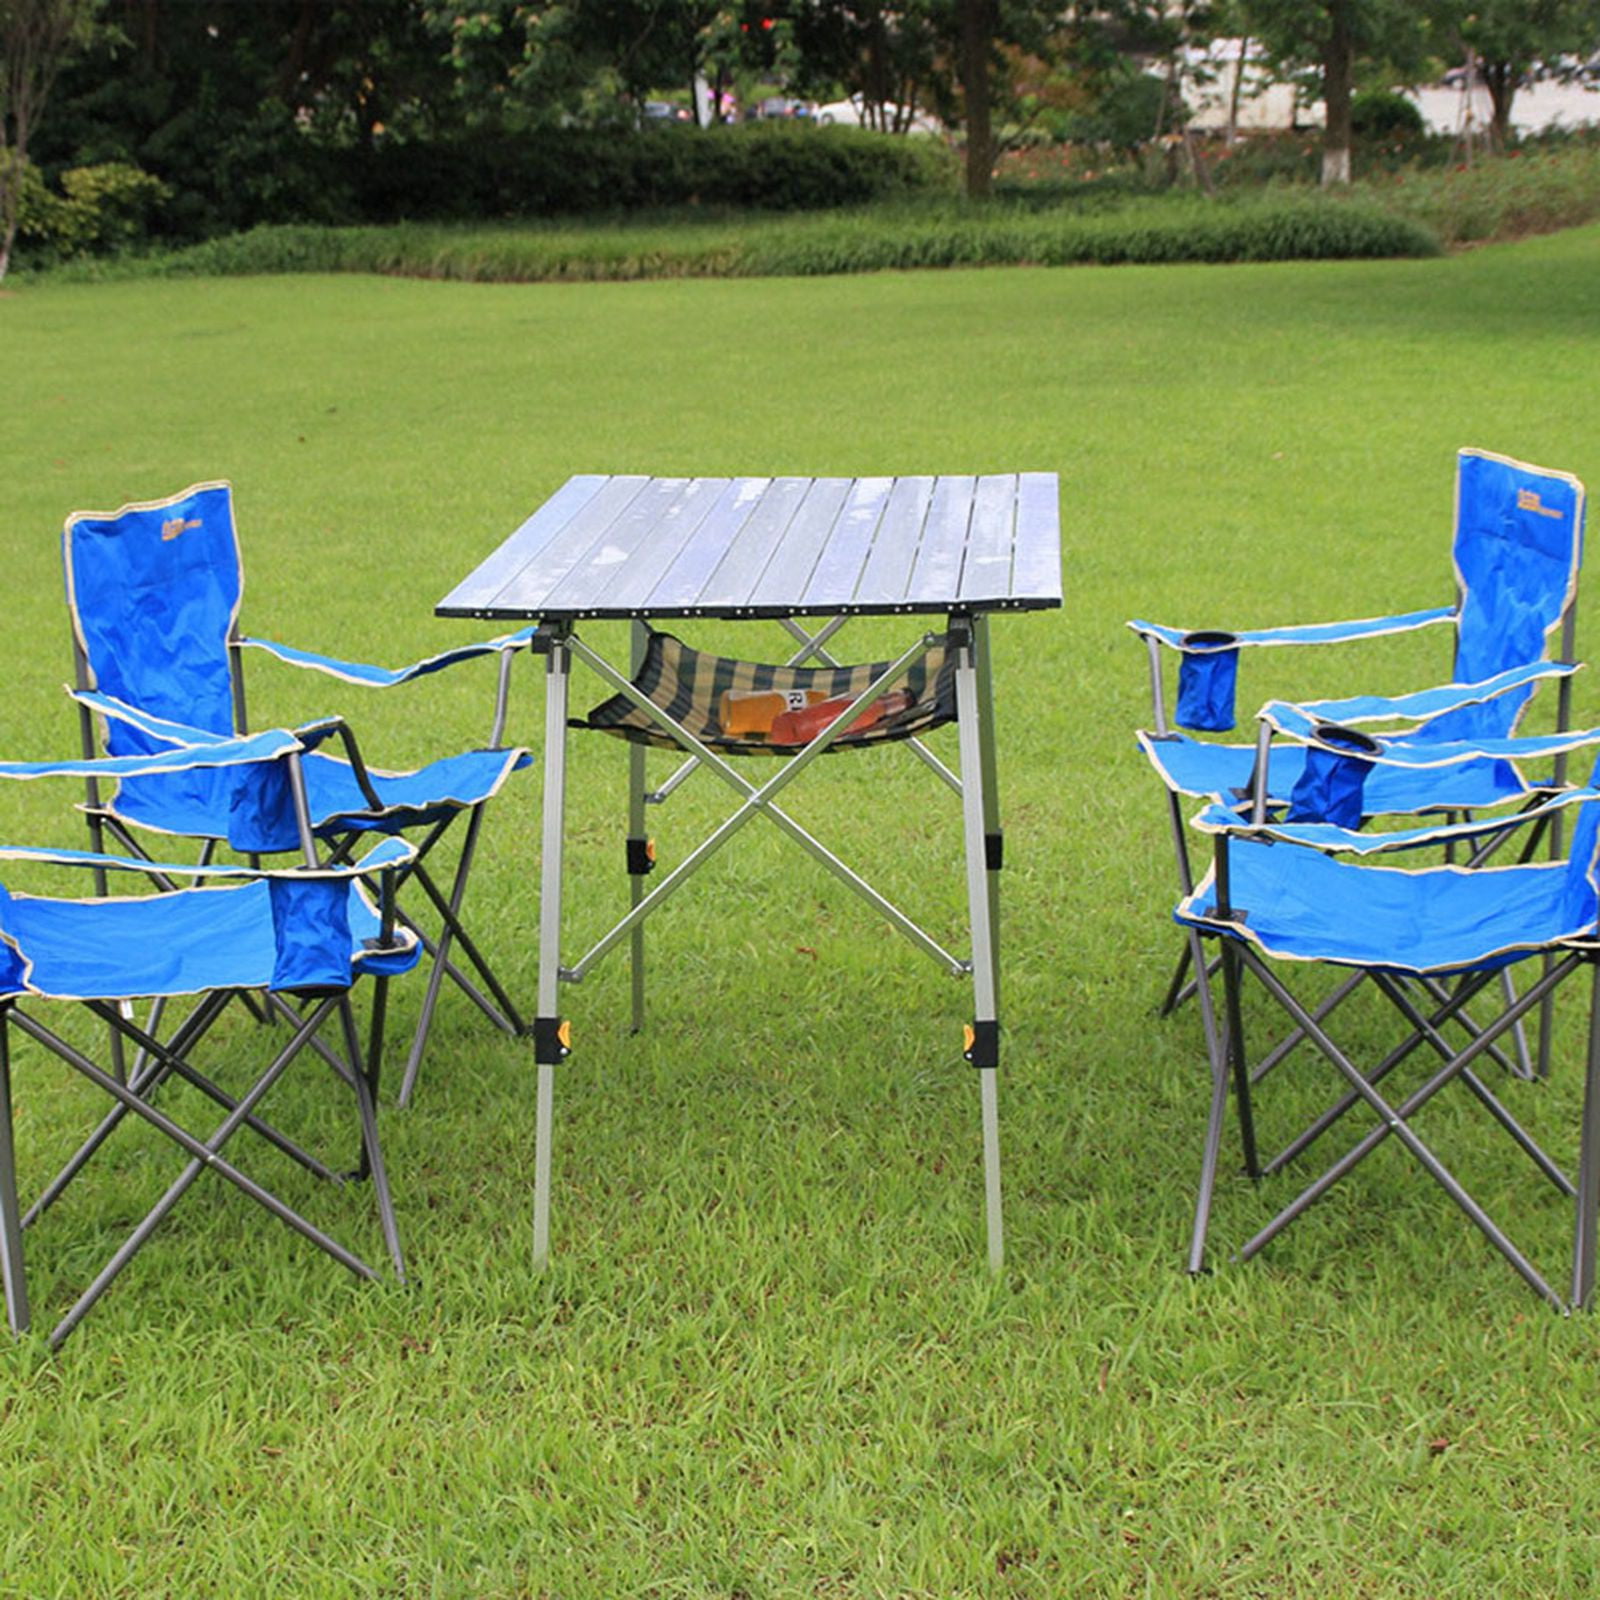 Details about   Outdoor Aluminum Alloy Folding Table Portable Ultra-Light Picnic Camping 